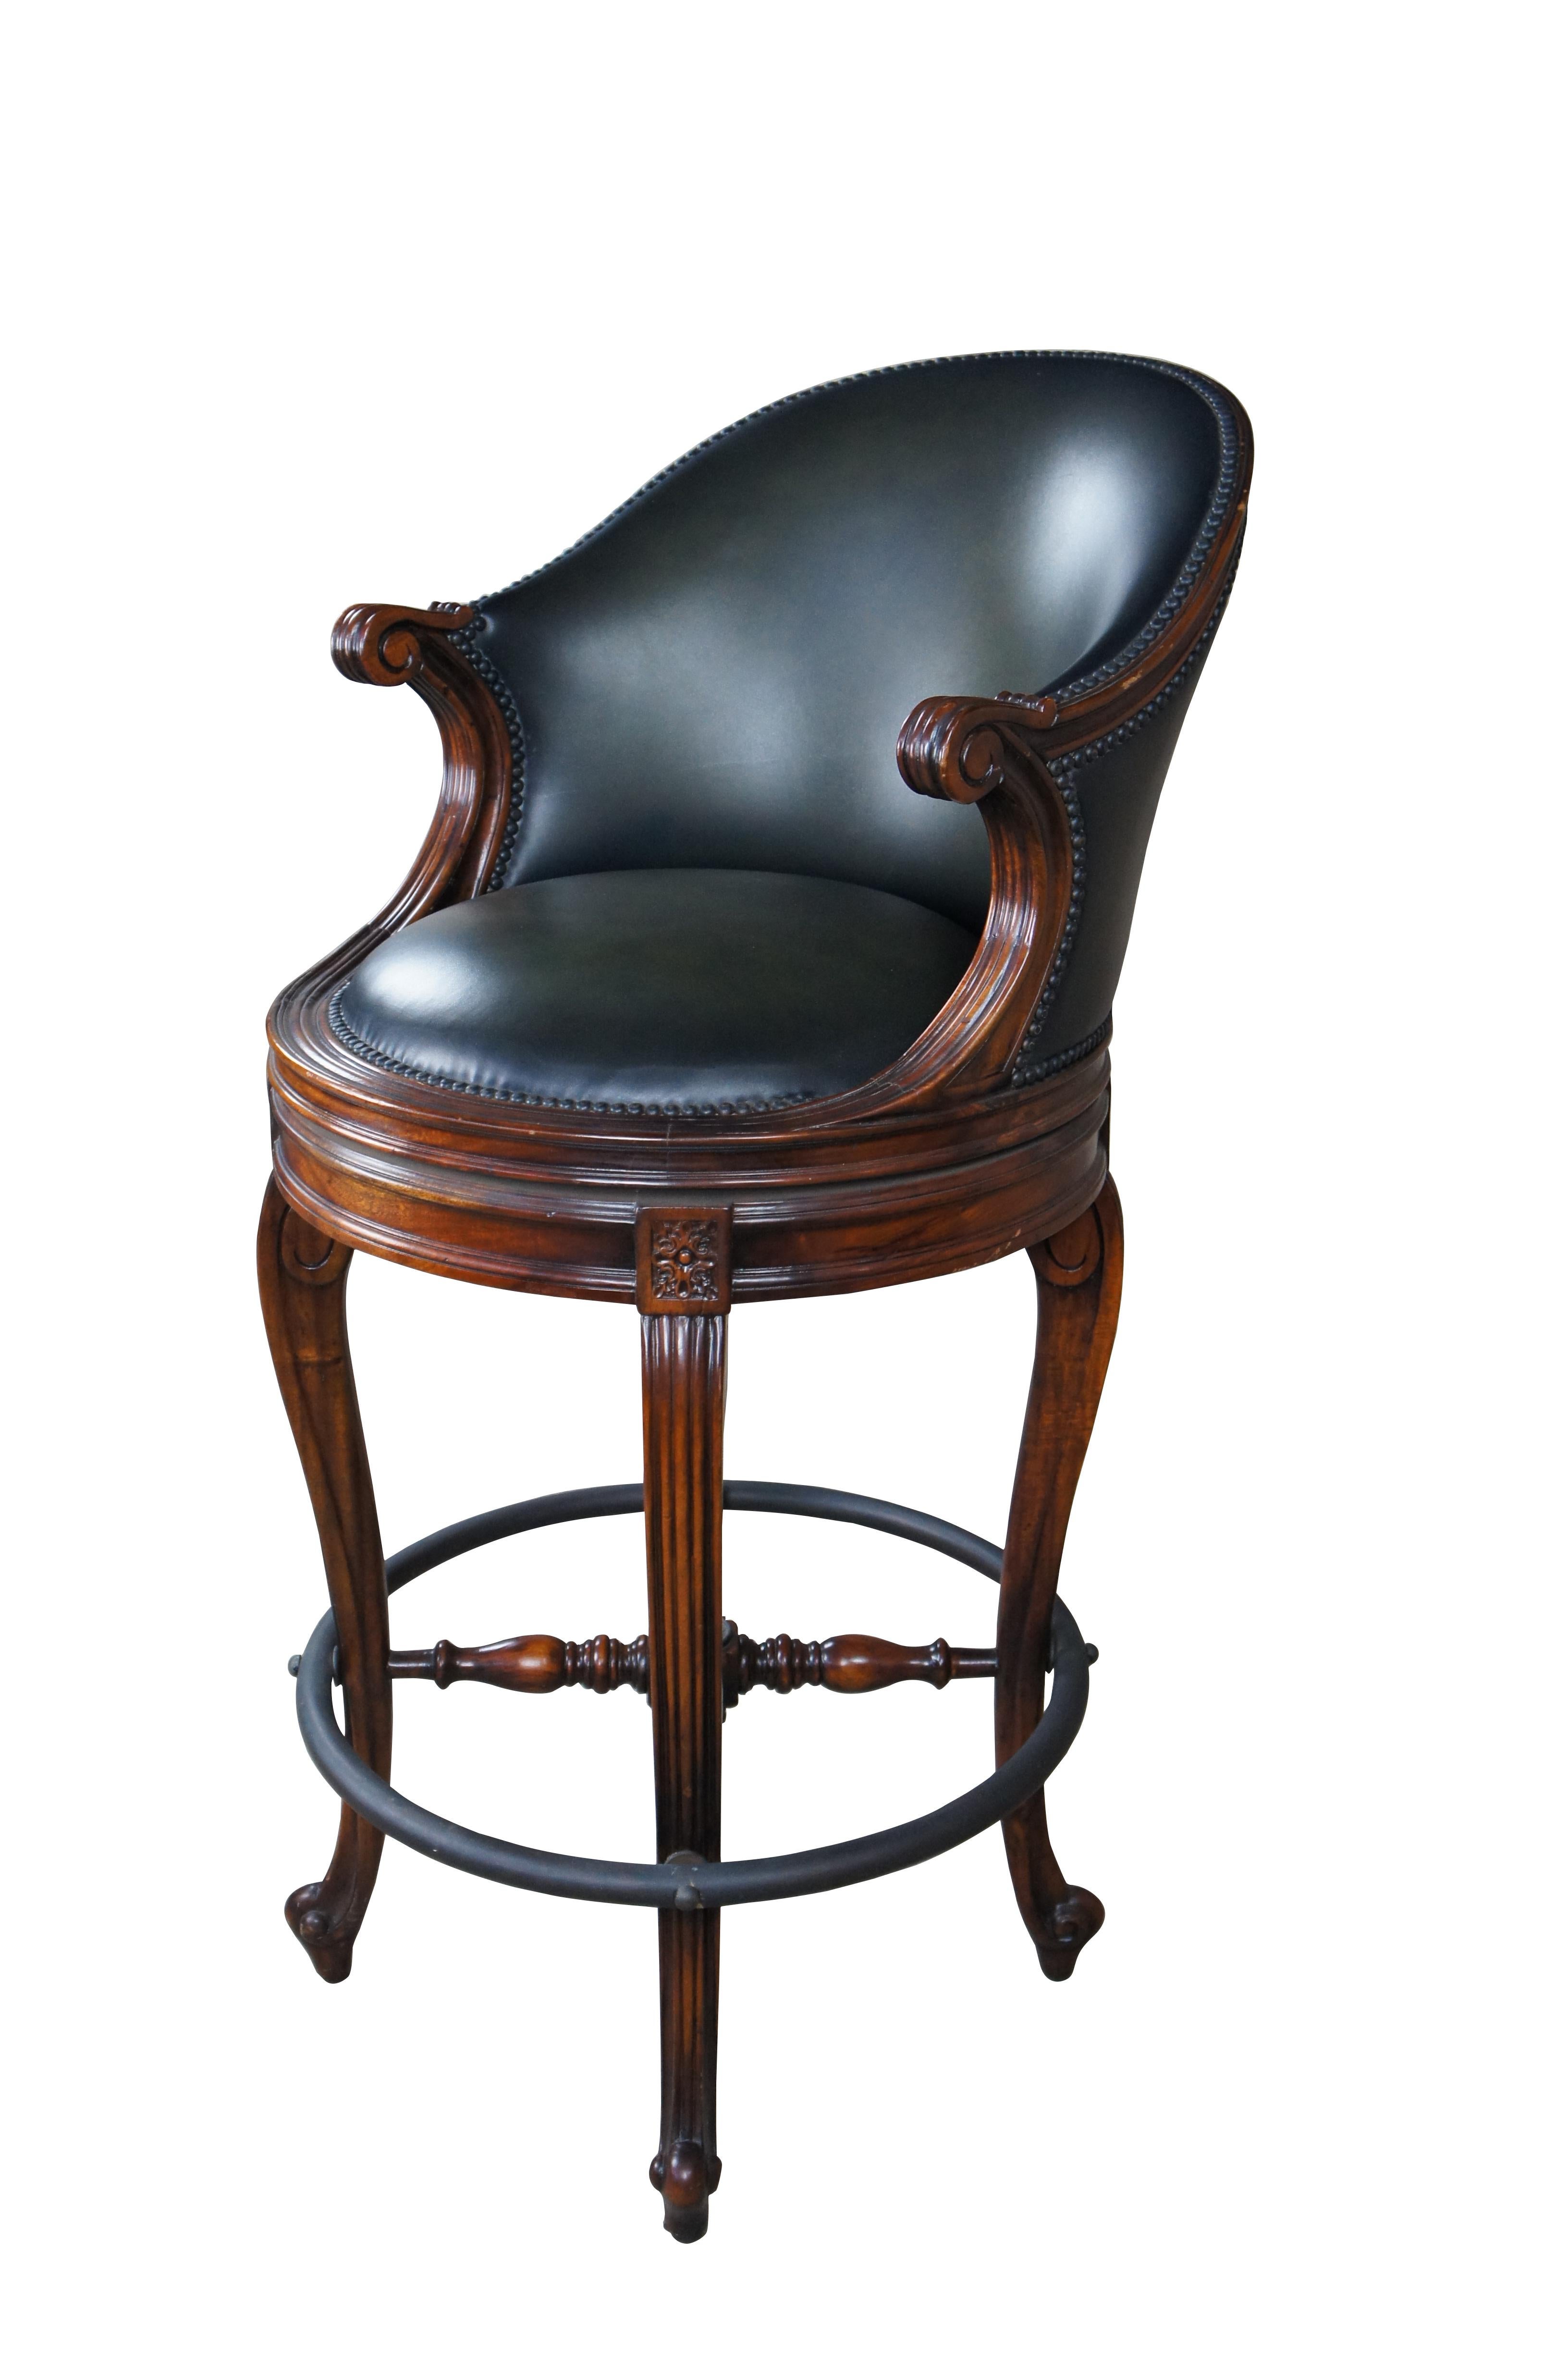 Theodore Alexander Napoleon III Mahogany Scoop Back Green Leather Bar Stool In Excellent Condition For Sale In Dayton, OH